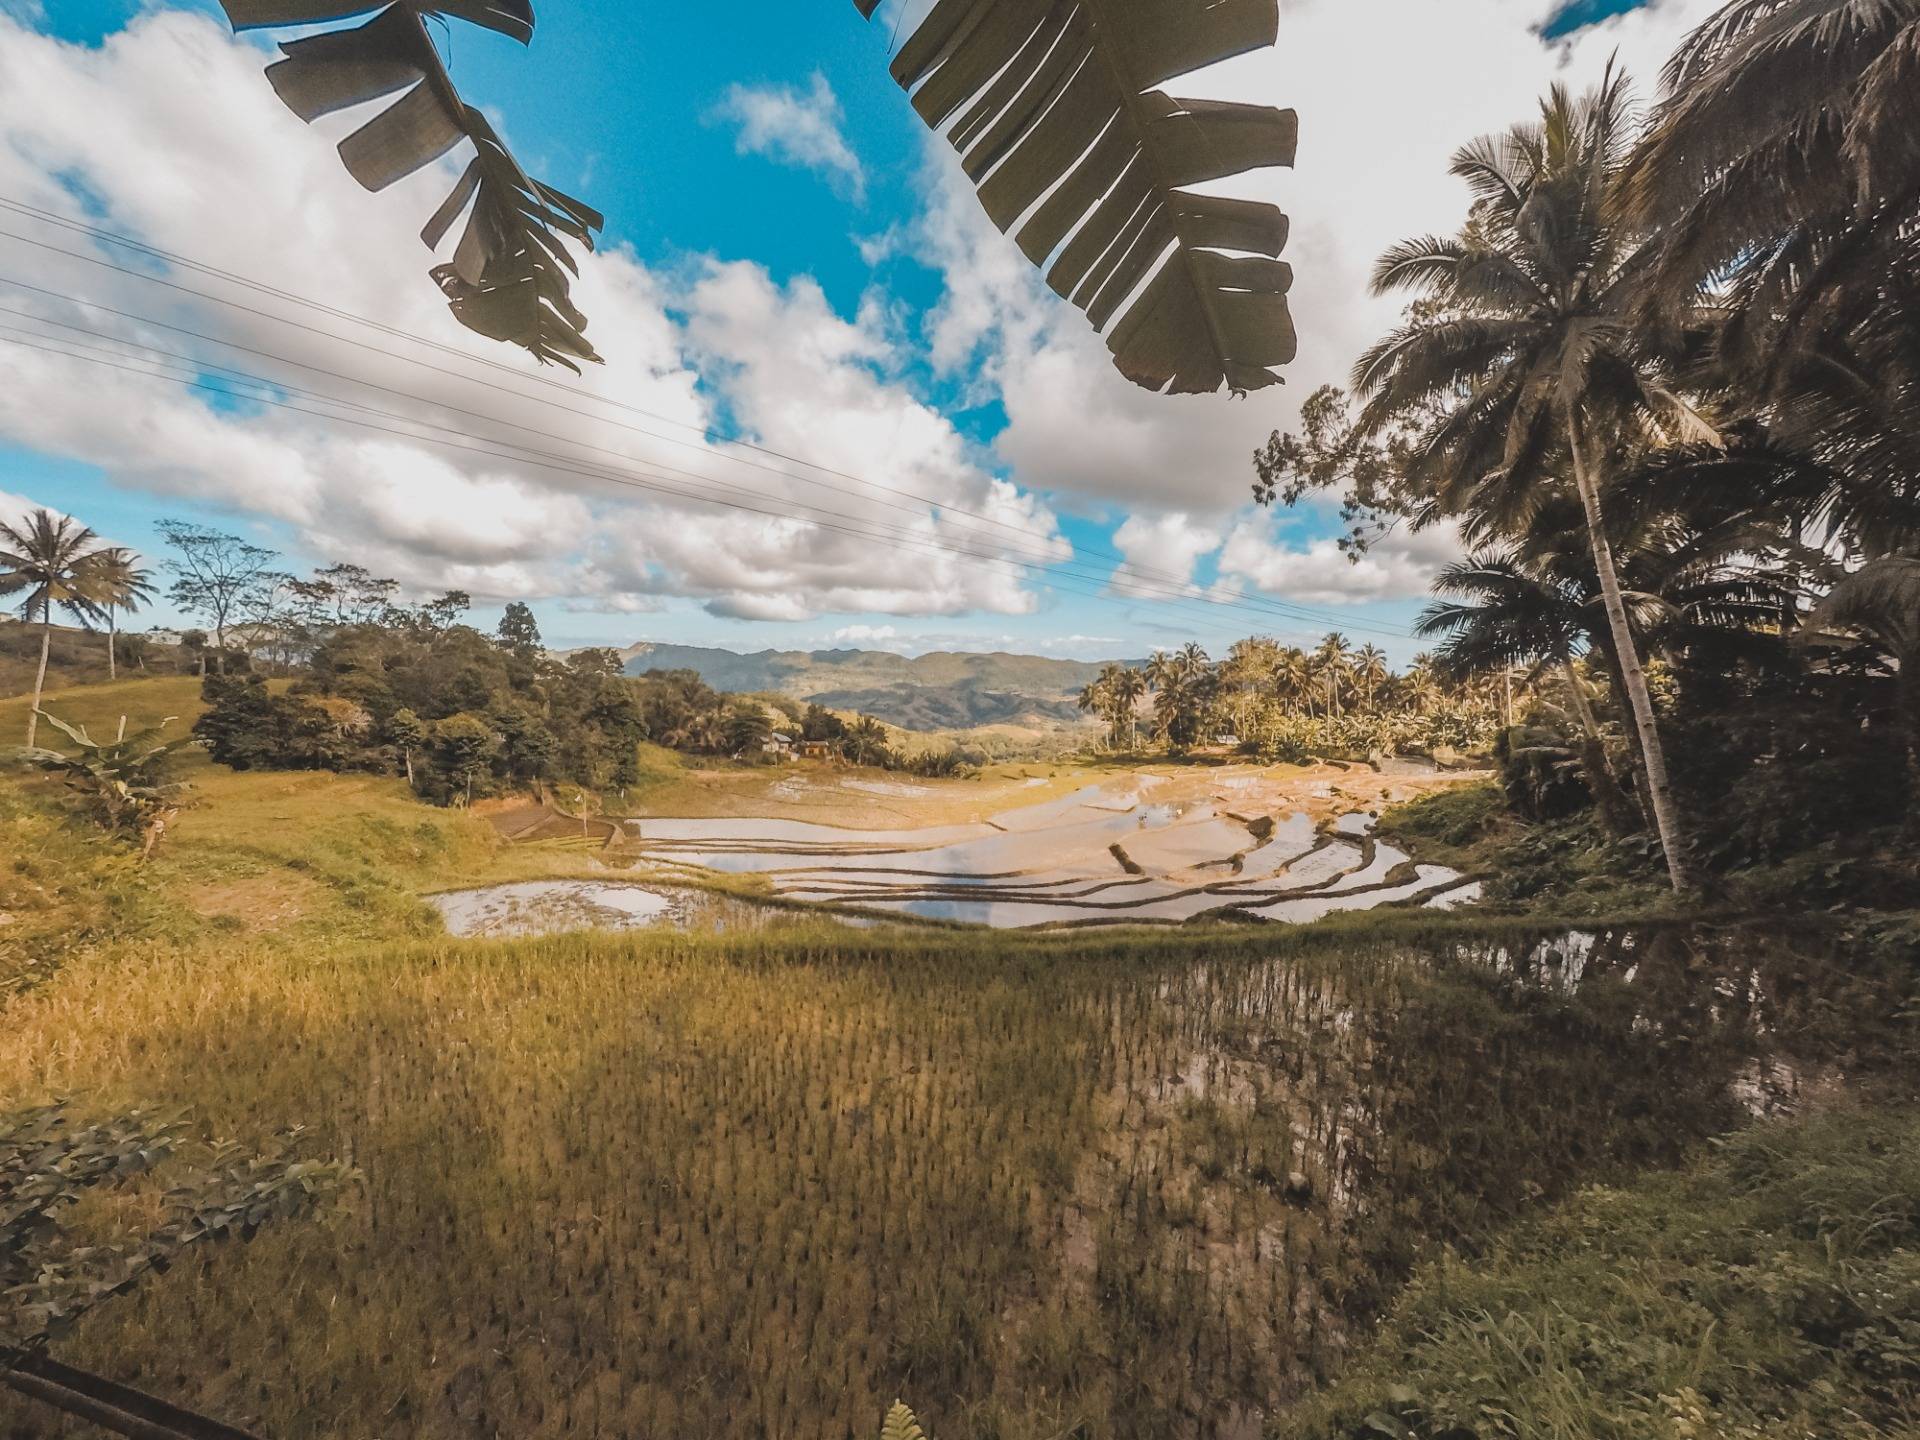 shot with GoPro Hero 5 (Dalaguete Mountain Area Rice Terraces) photography by me